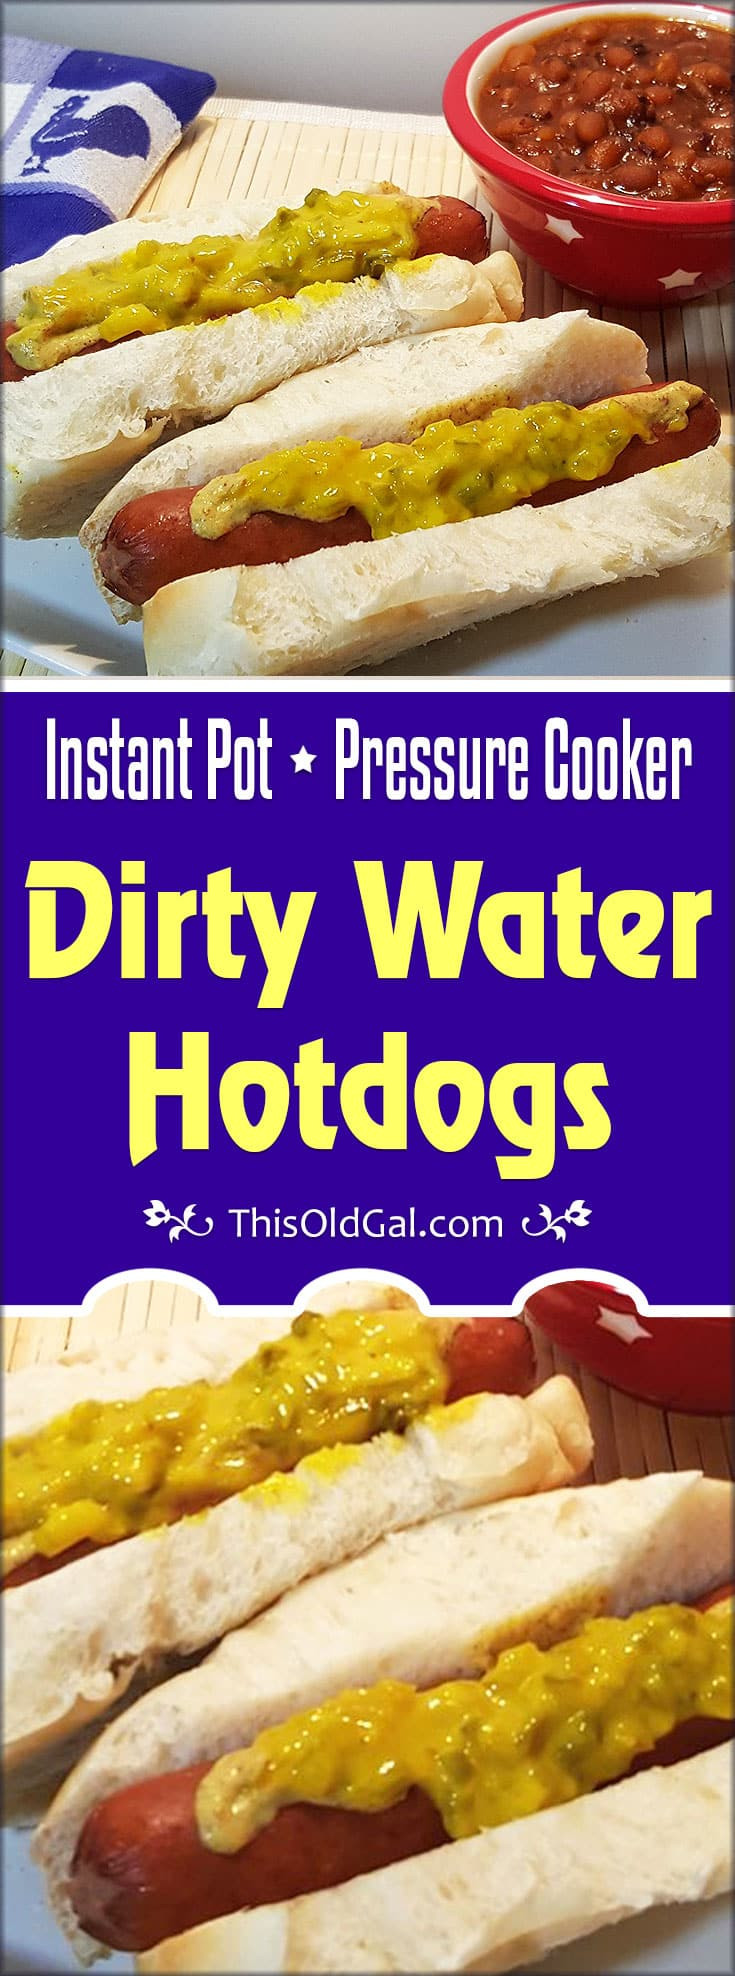 Pressure Cooker Hot Dogs
 Pressure Cooker Dirty Water Hot Dogs [Instant Pot]